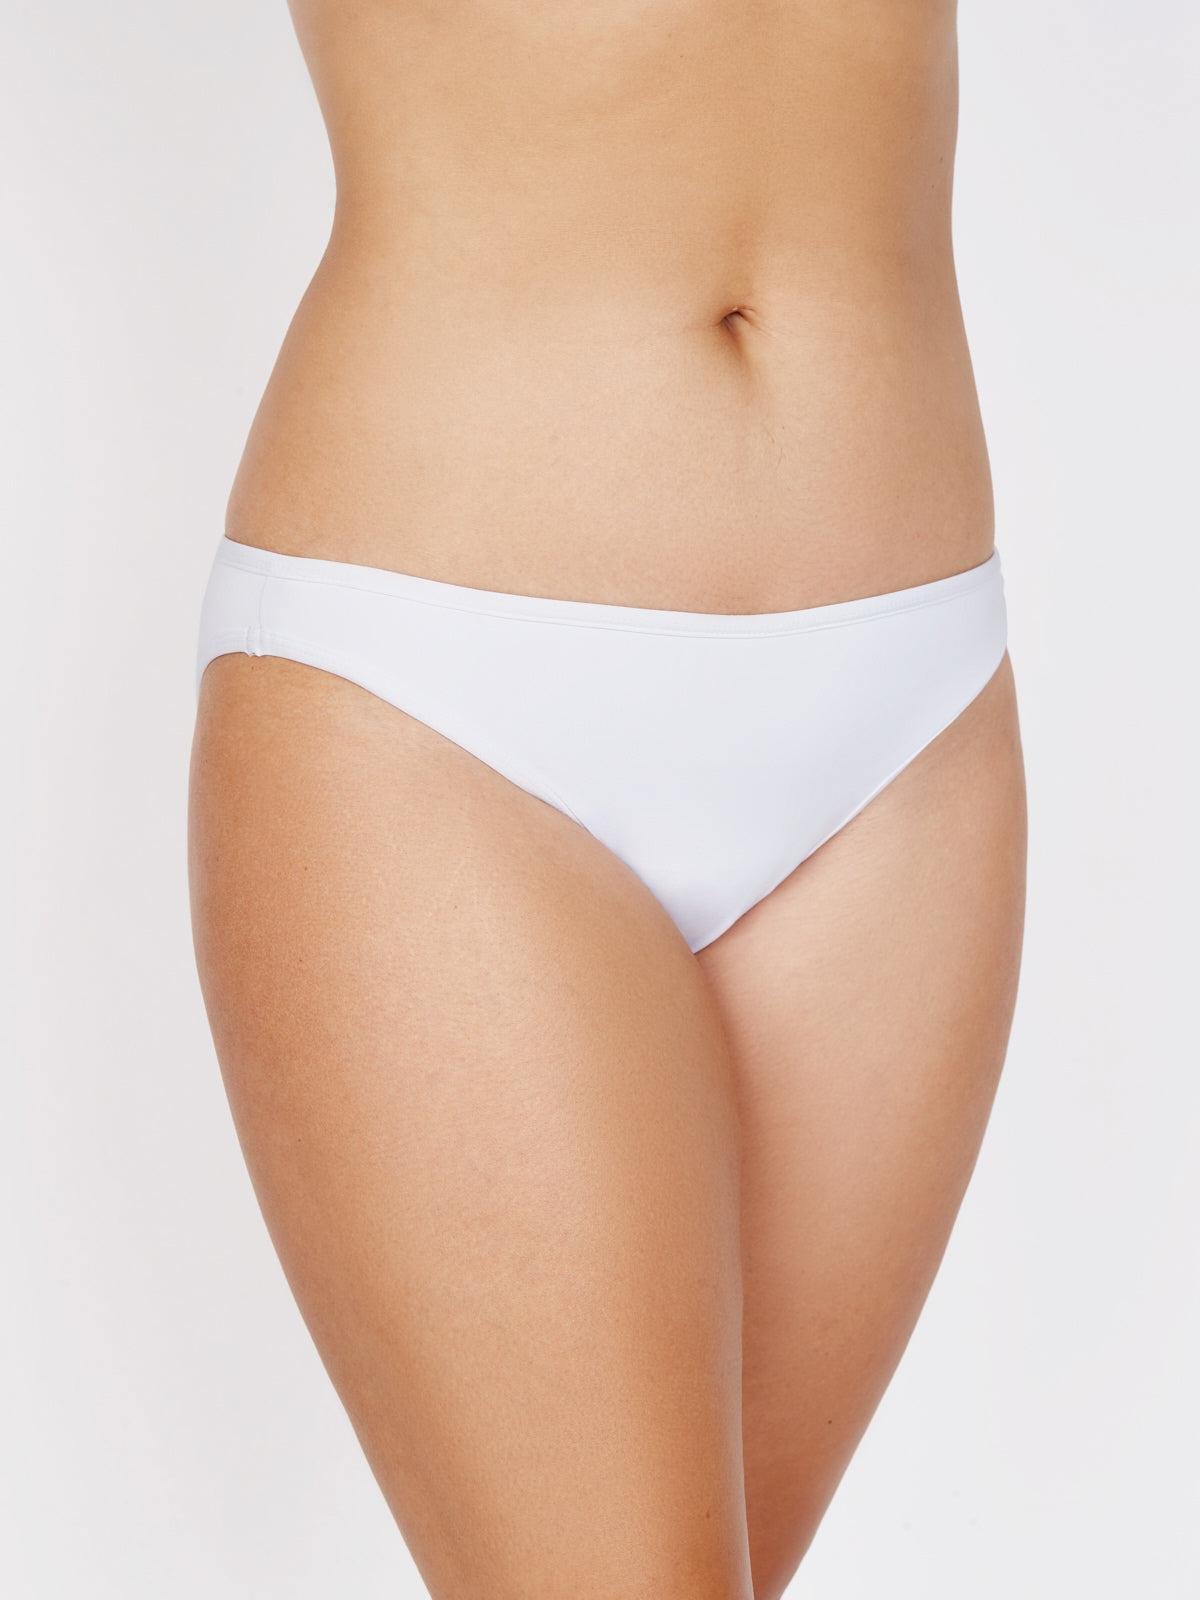 Classic Ruched Back Bikini Bottom in White by FREDERICK'S OF HOLLYWOOD